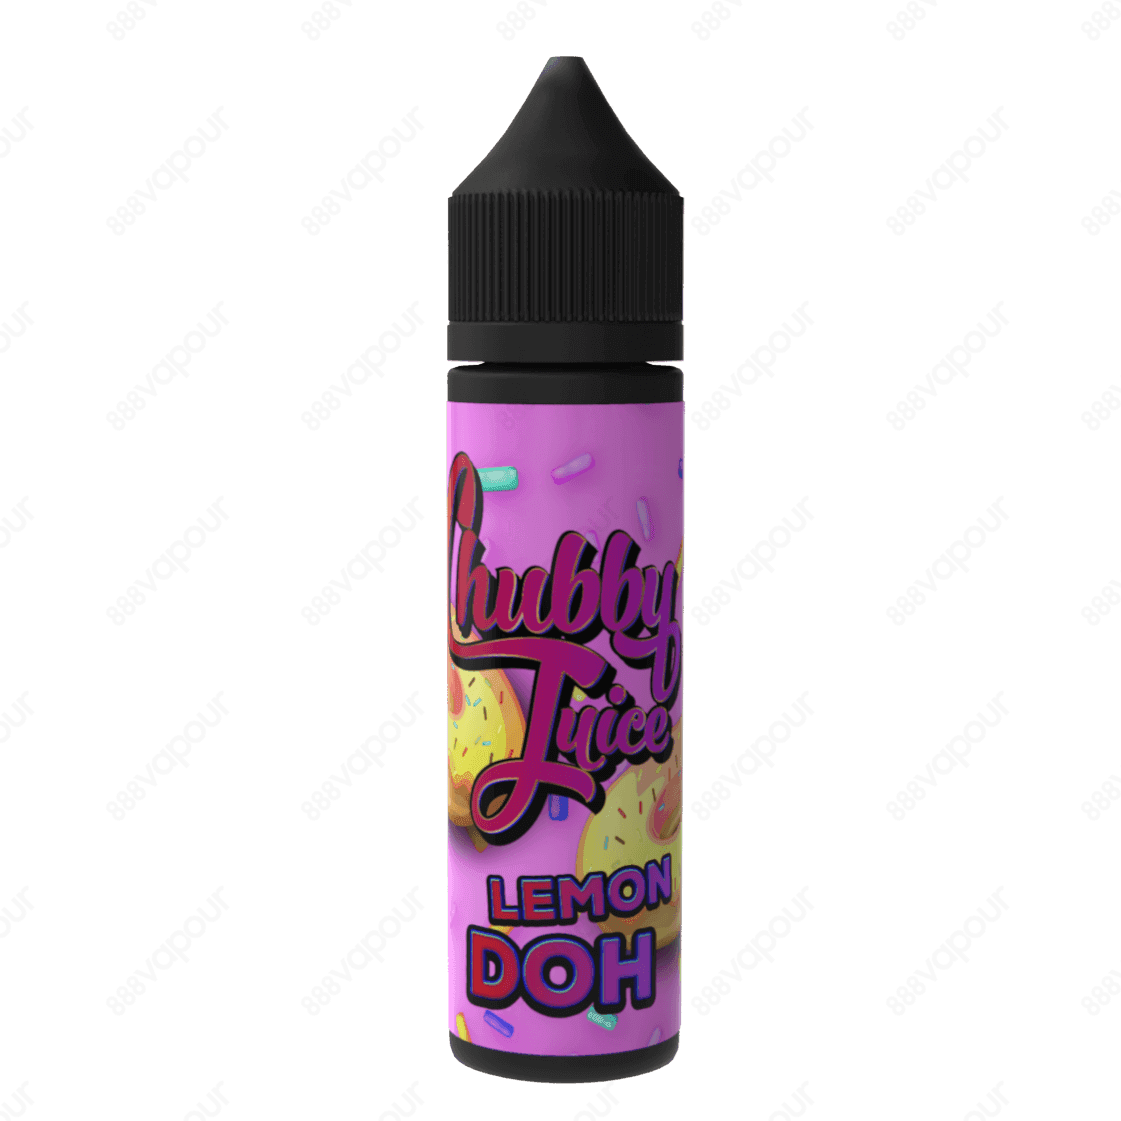 Chubby Juice Lemon Doh E-Liquid | £6.99 | 888 Vapour | Chubby Juice Lemon Doh e-liquid is a deep-fried doughnut sprinkled with fruity pebbles and filled with sweet lemon curd. Lemon Doh by Chubby Juice is available in a 0mg 100ml shortfill, with space for